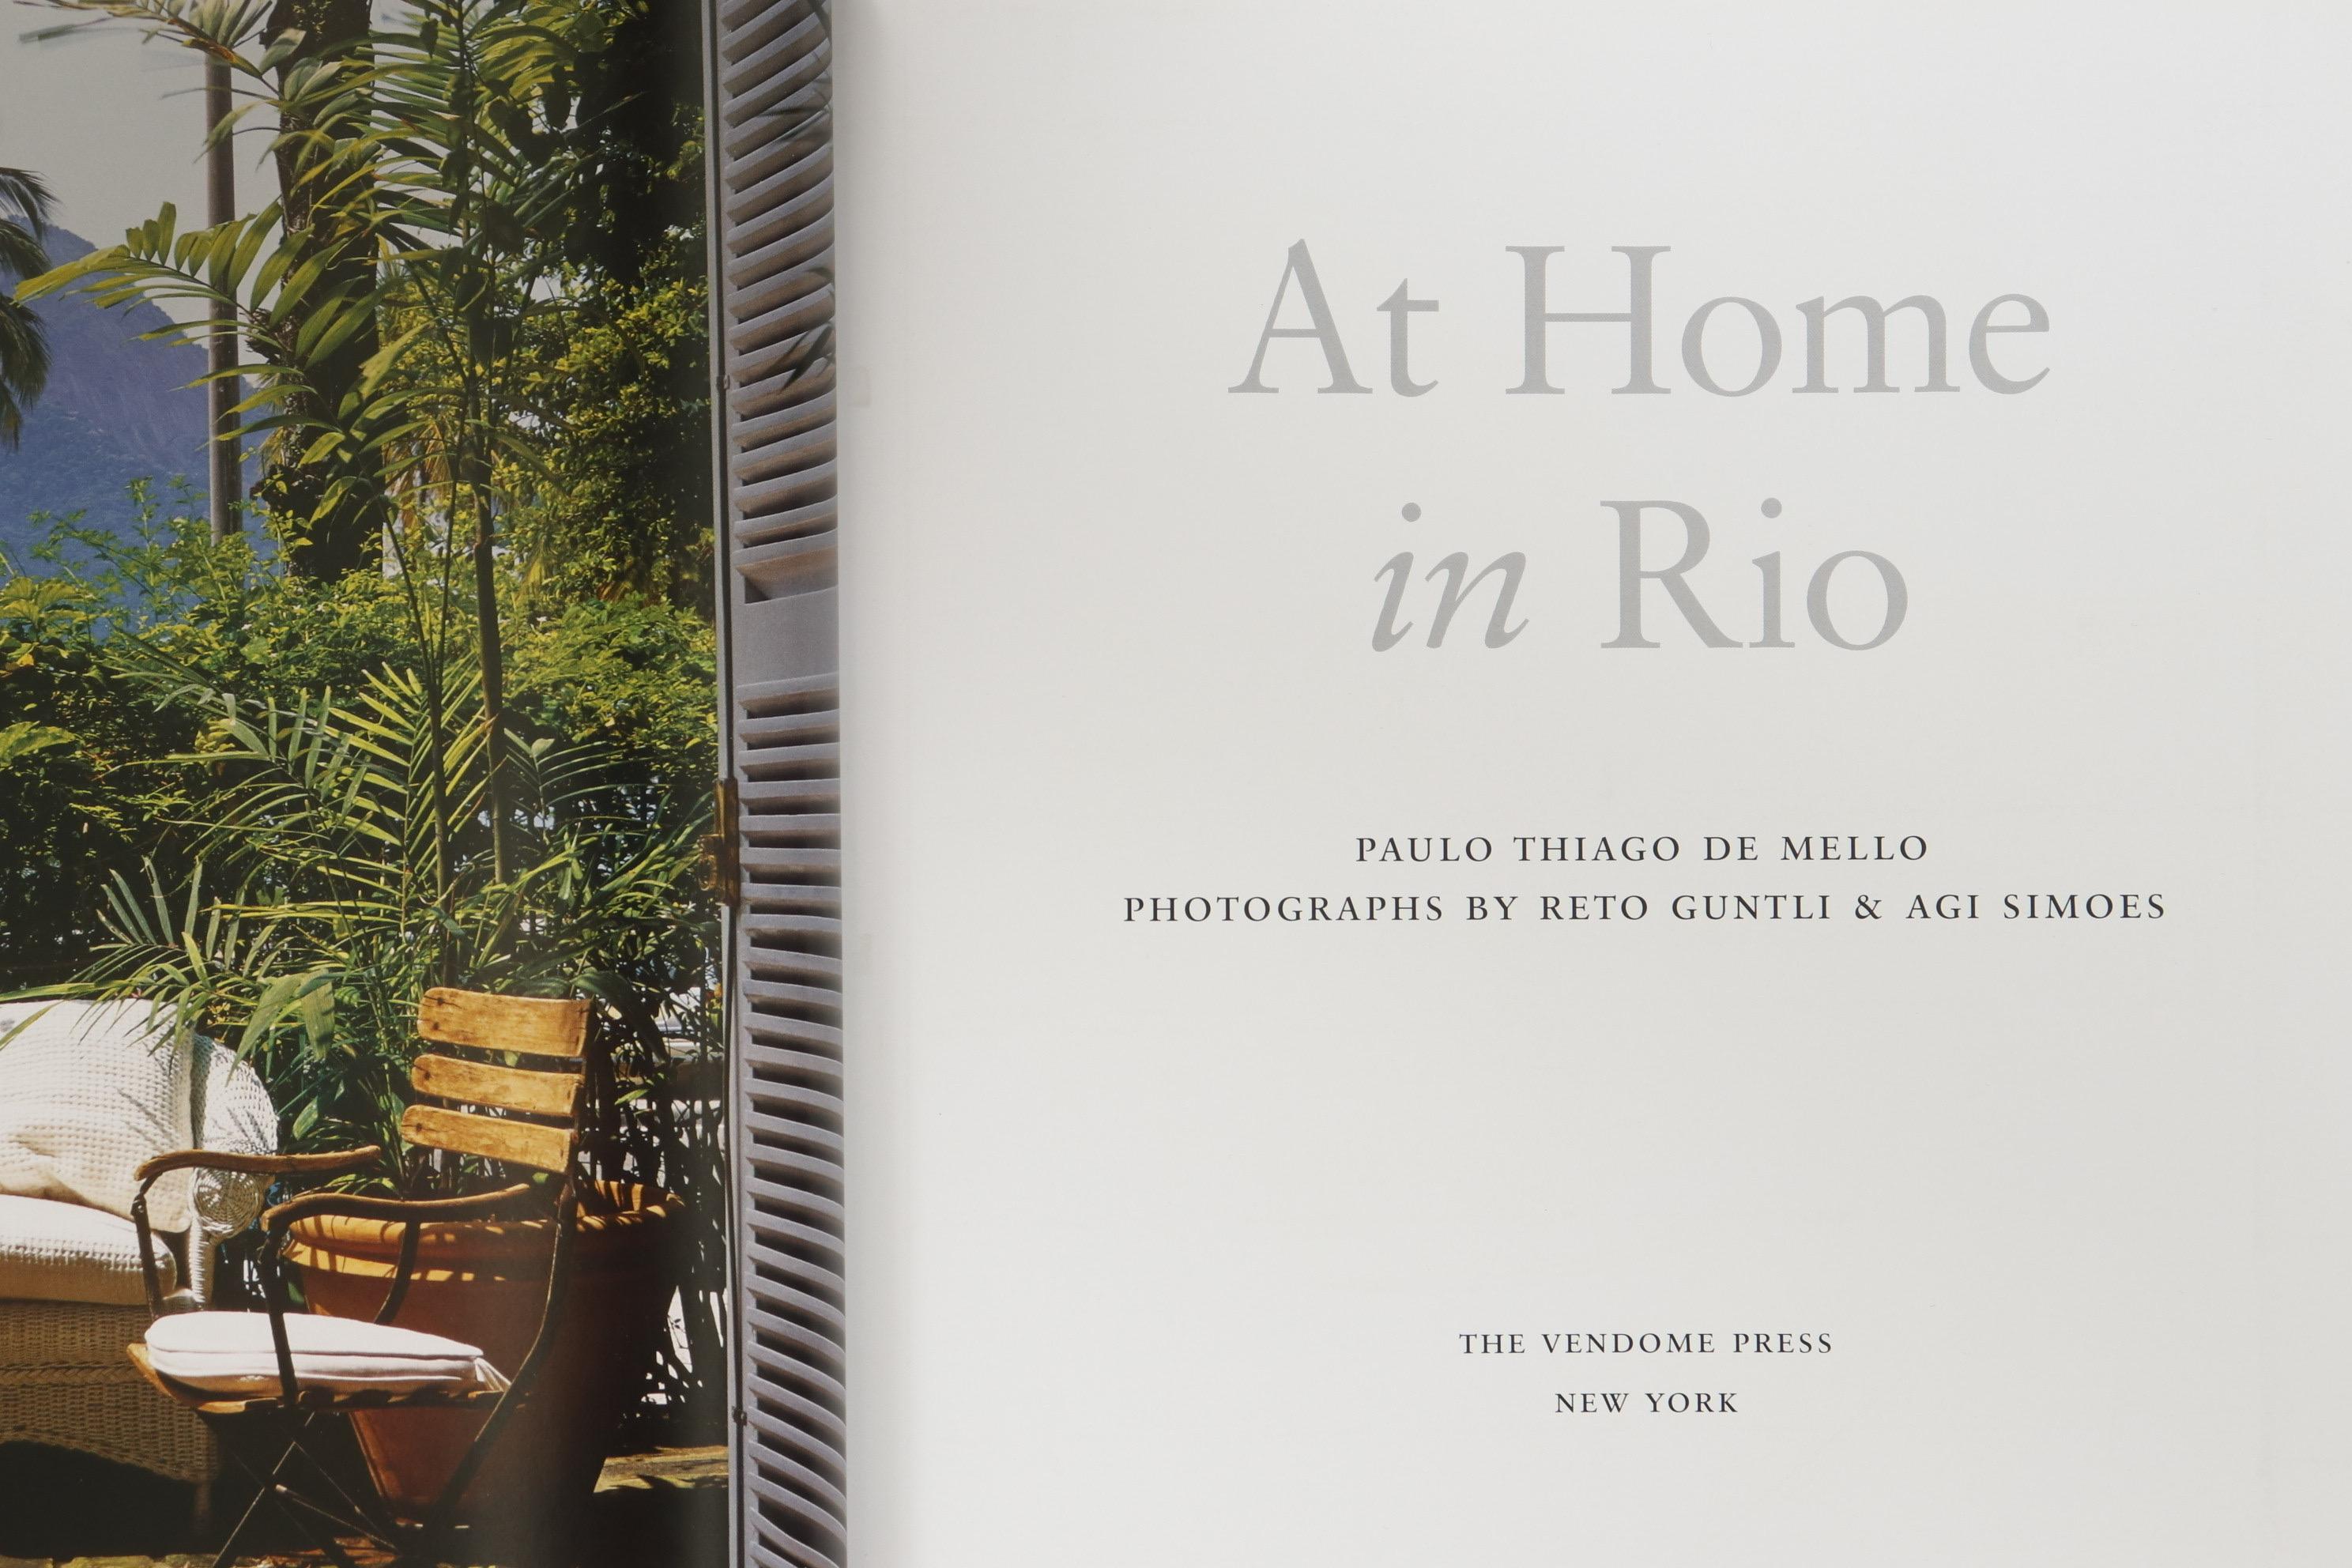 At Home in Rio by Paulo Thiago De Mello, photographs by Reto Guntli and Agi Simoes. Published by The Vendome Press of New york in 2006. Printed in Spain. Hardcover book with dustjacket, stated first edition, 201 pages.
 